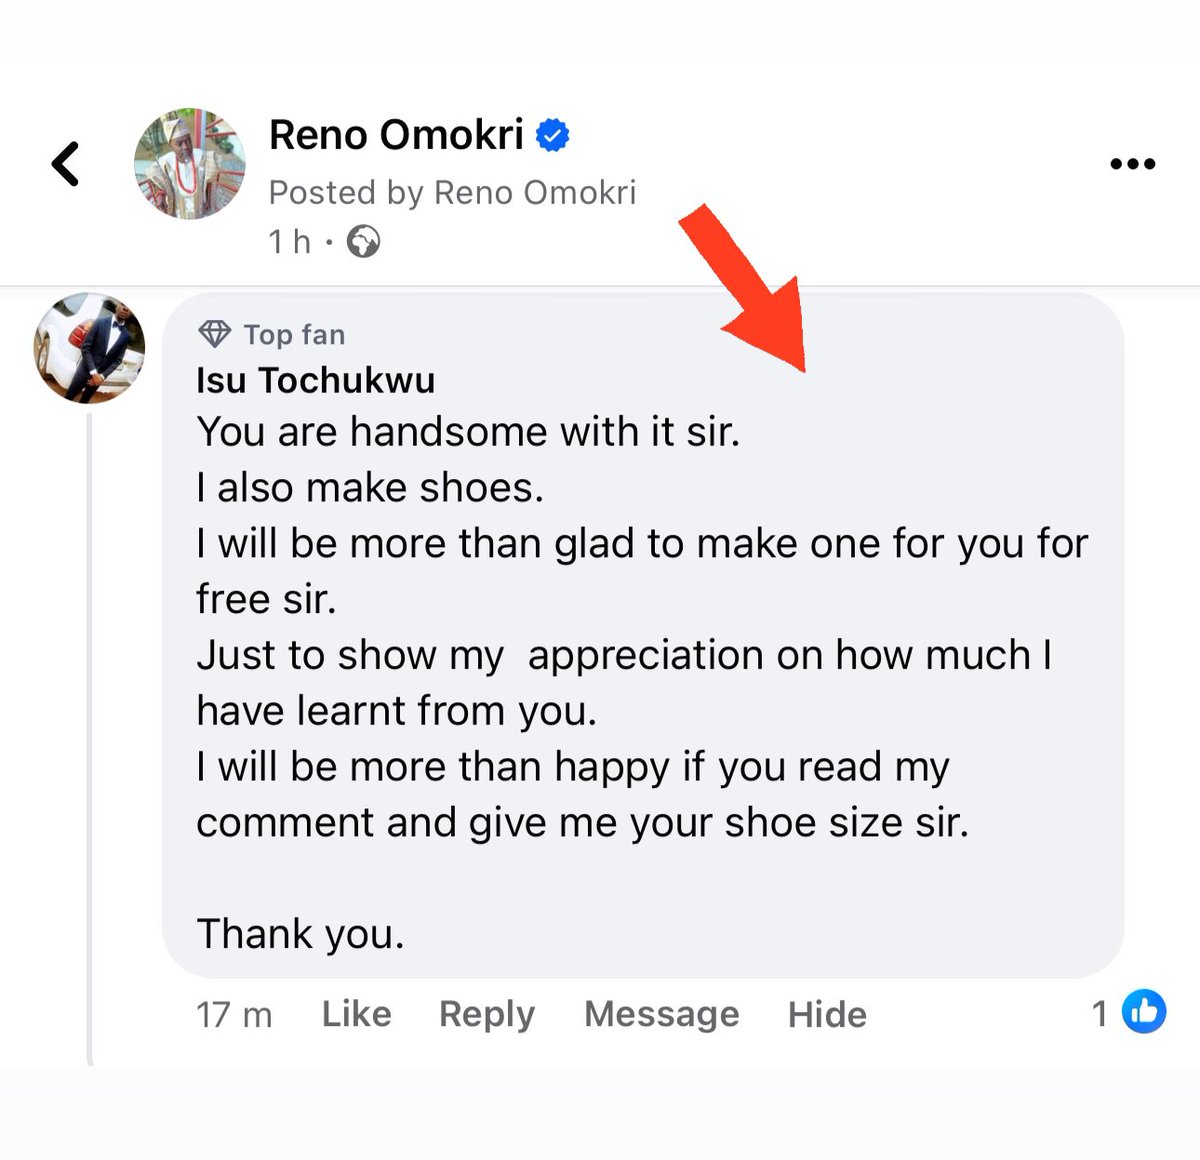 Dear Tochukwu,

Thank you for your feedback. Aww! That is so sweet of you. Your offer warms my heart, but it is best that I get my shoes from Kano or elsewhere. I honestly would want to take you up on your offer. But #GrowNairaBuyNaija has taken off and is helping the Naira grow,…